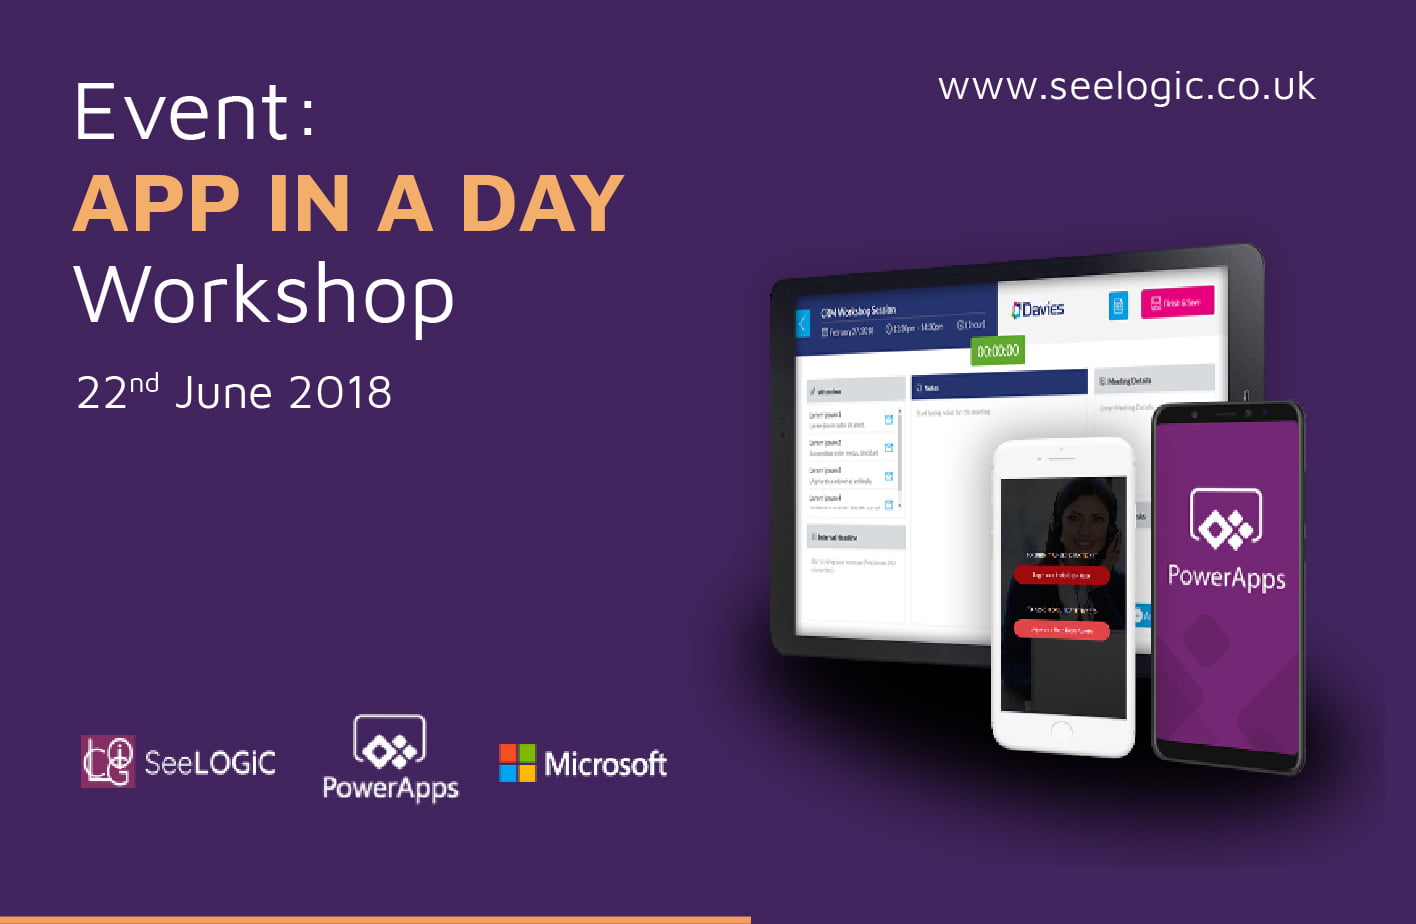 Event: App in a Day Workshop – 22nd June 2018